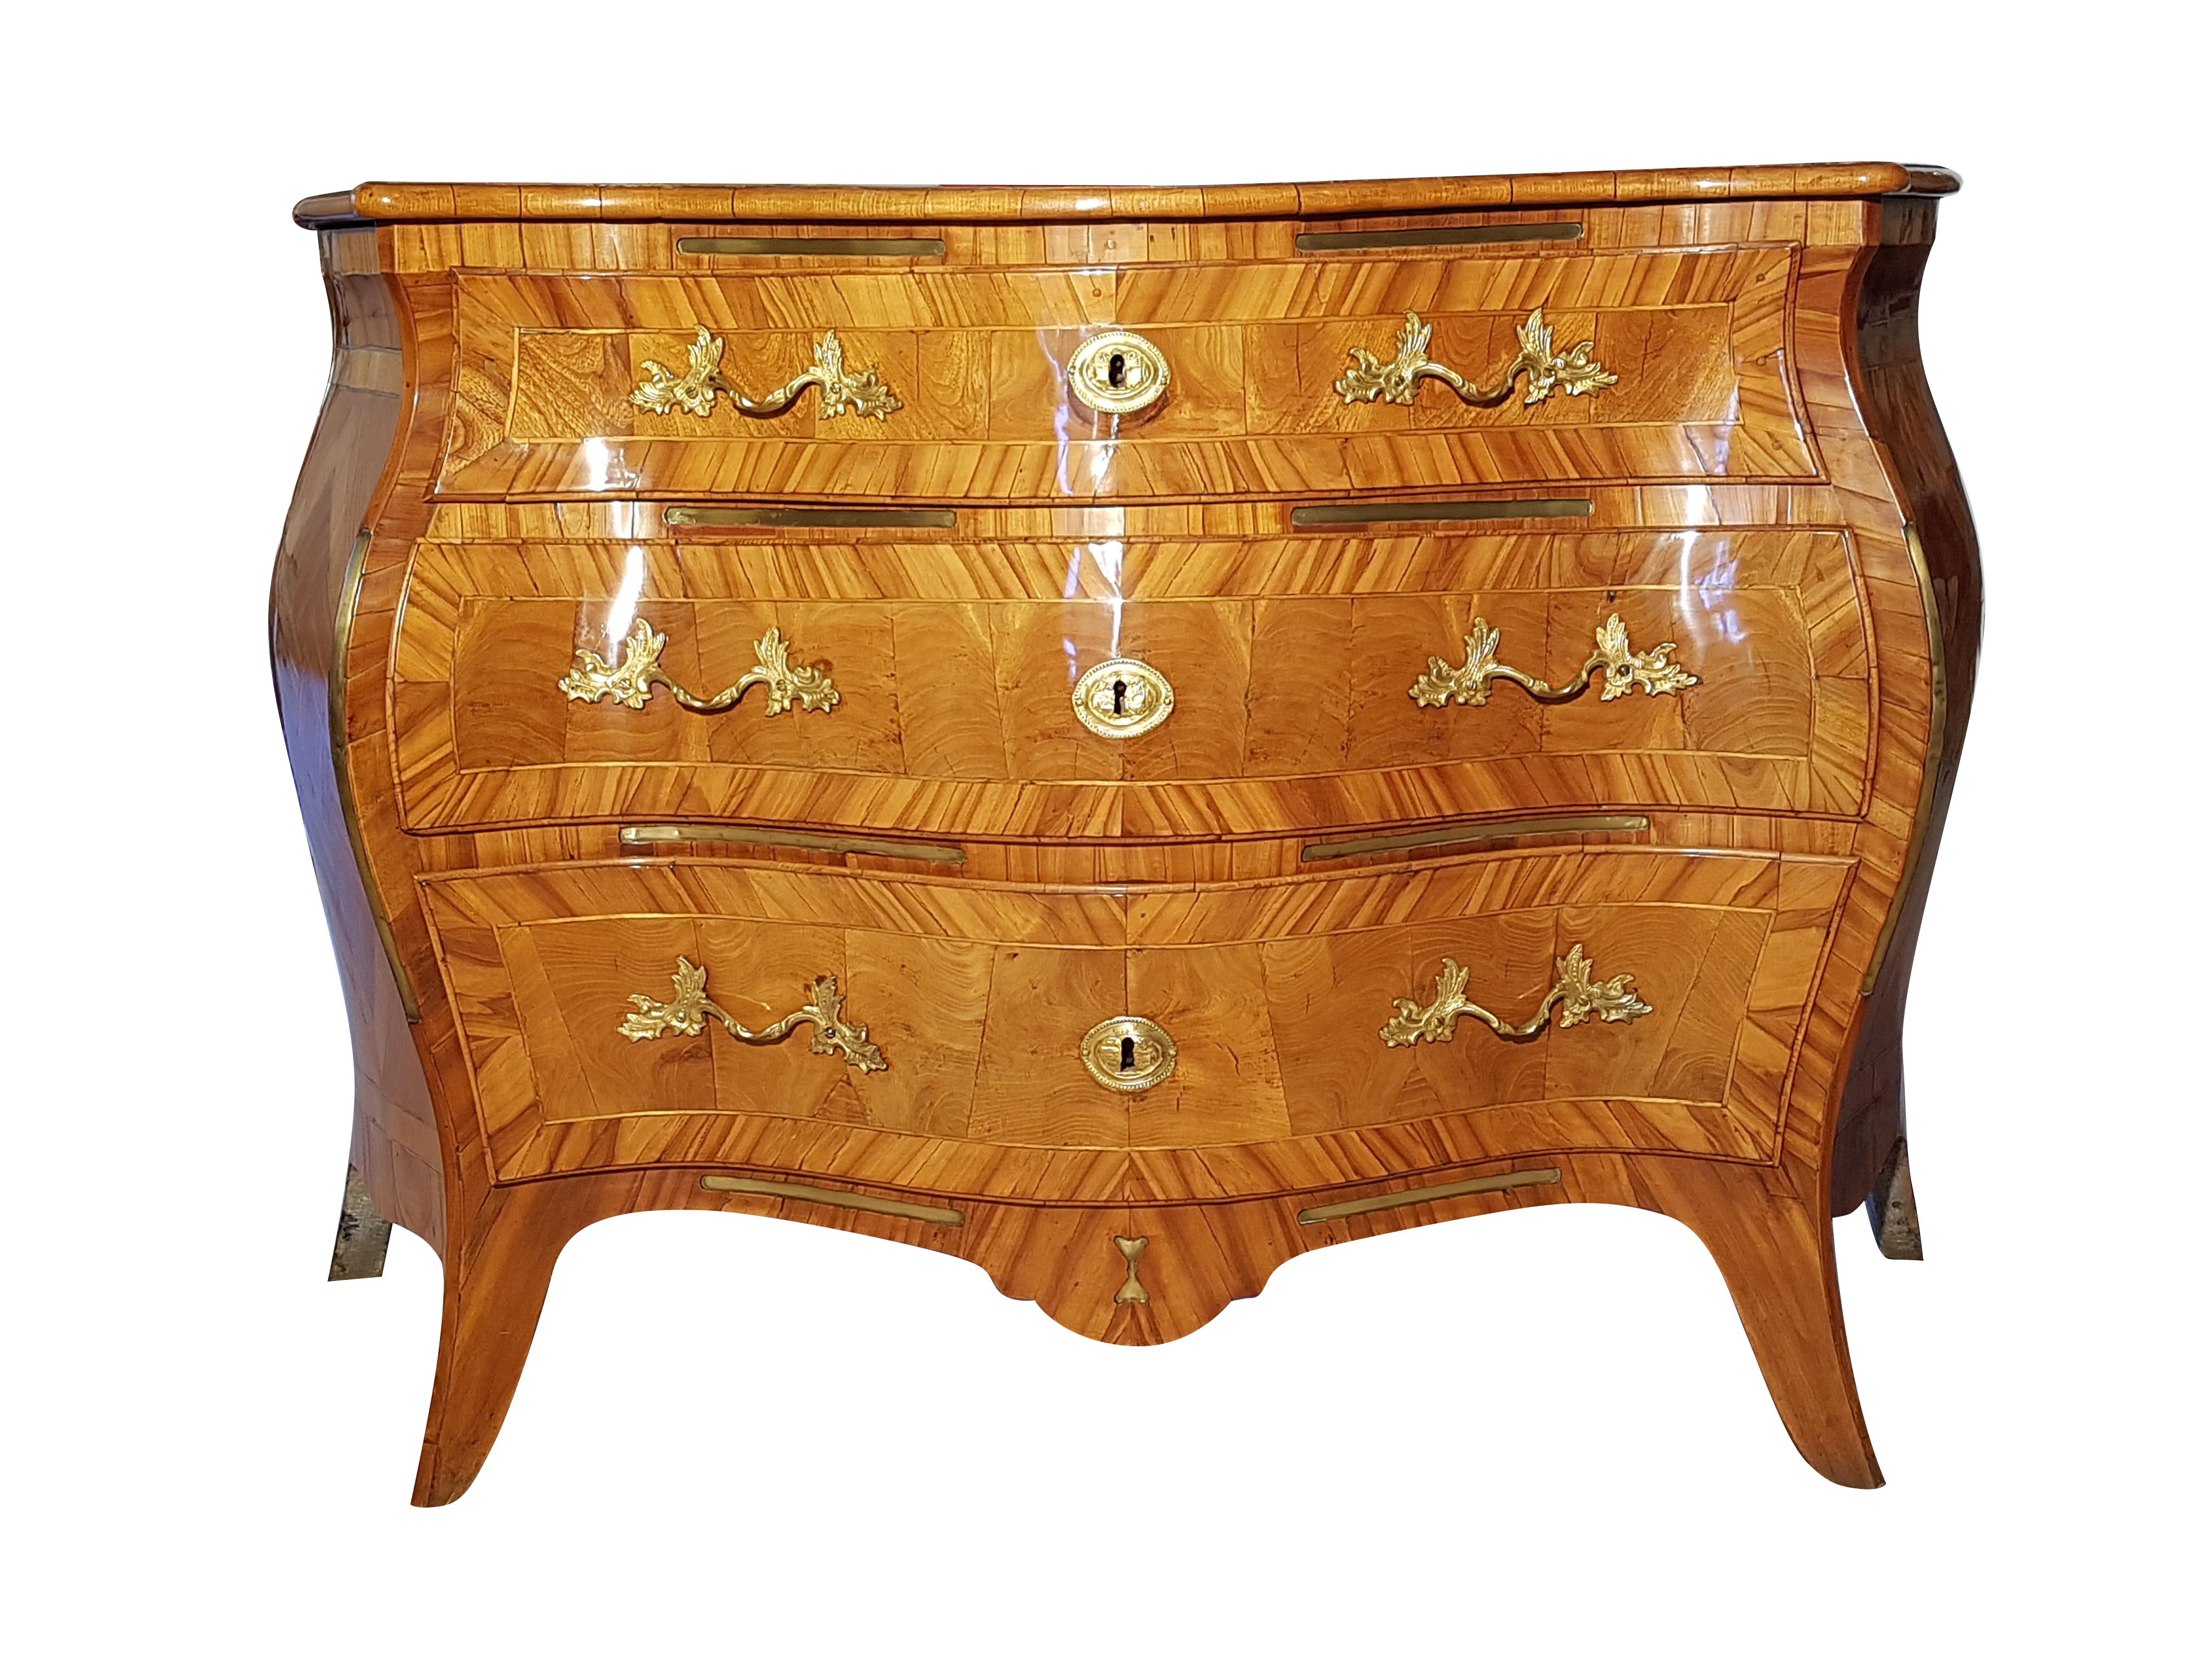 This magnificent commode from the Rococo period was carefully restored - preserving the patina - and polished by hand with shellac. Various fruitwoods make up the wonderful veneer of the curved piece and create a bright variety of colors and